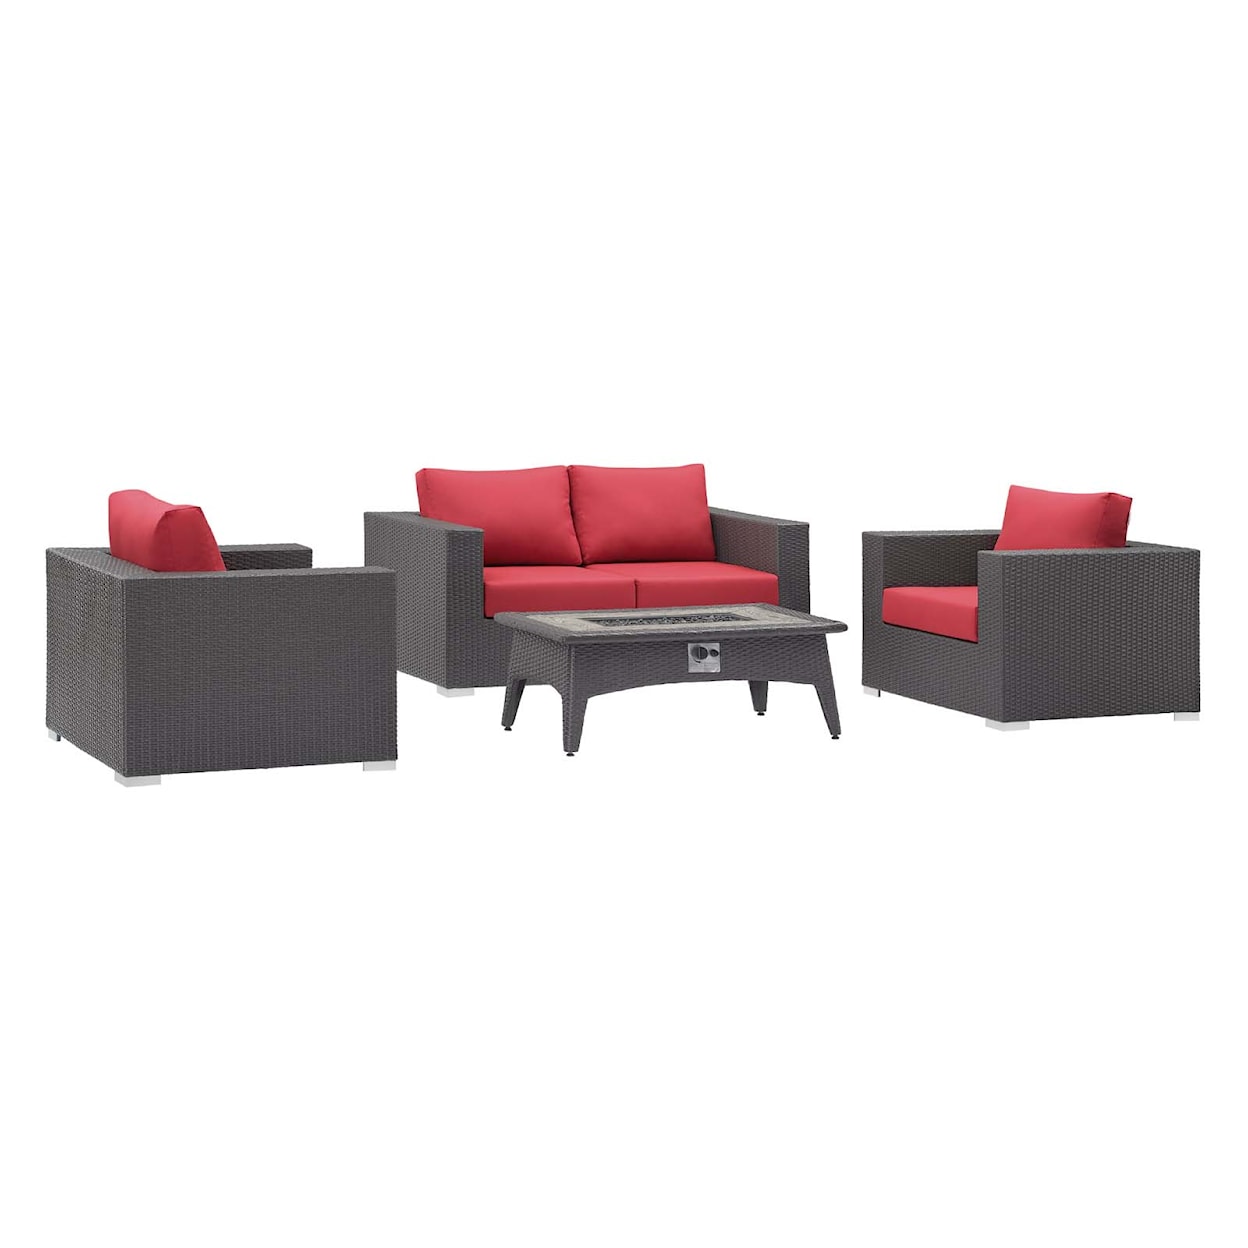 Modway Convene Outdoor 4 Piece with Fire Pit